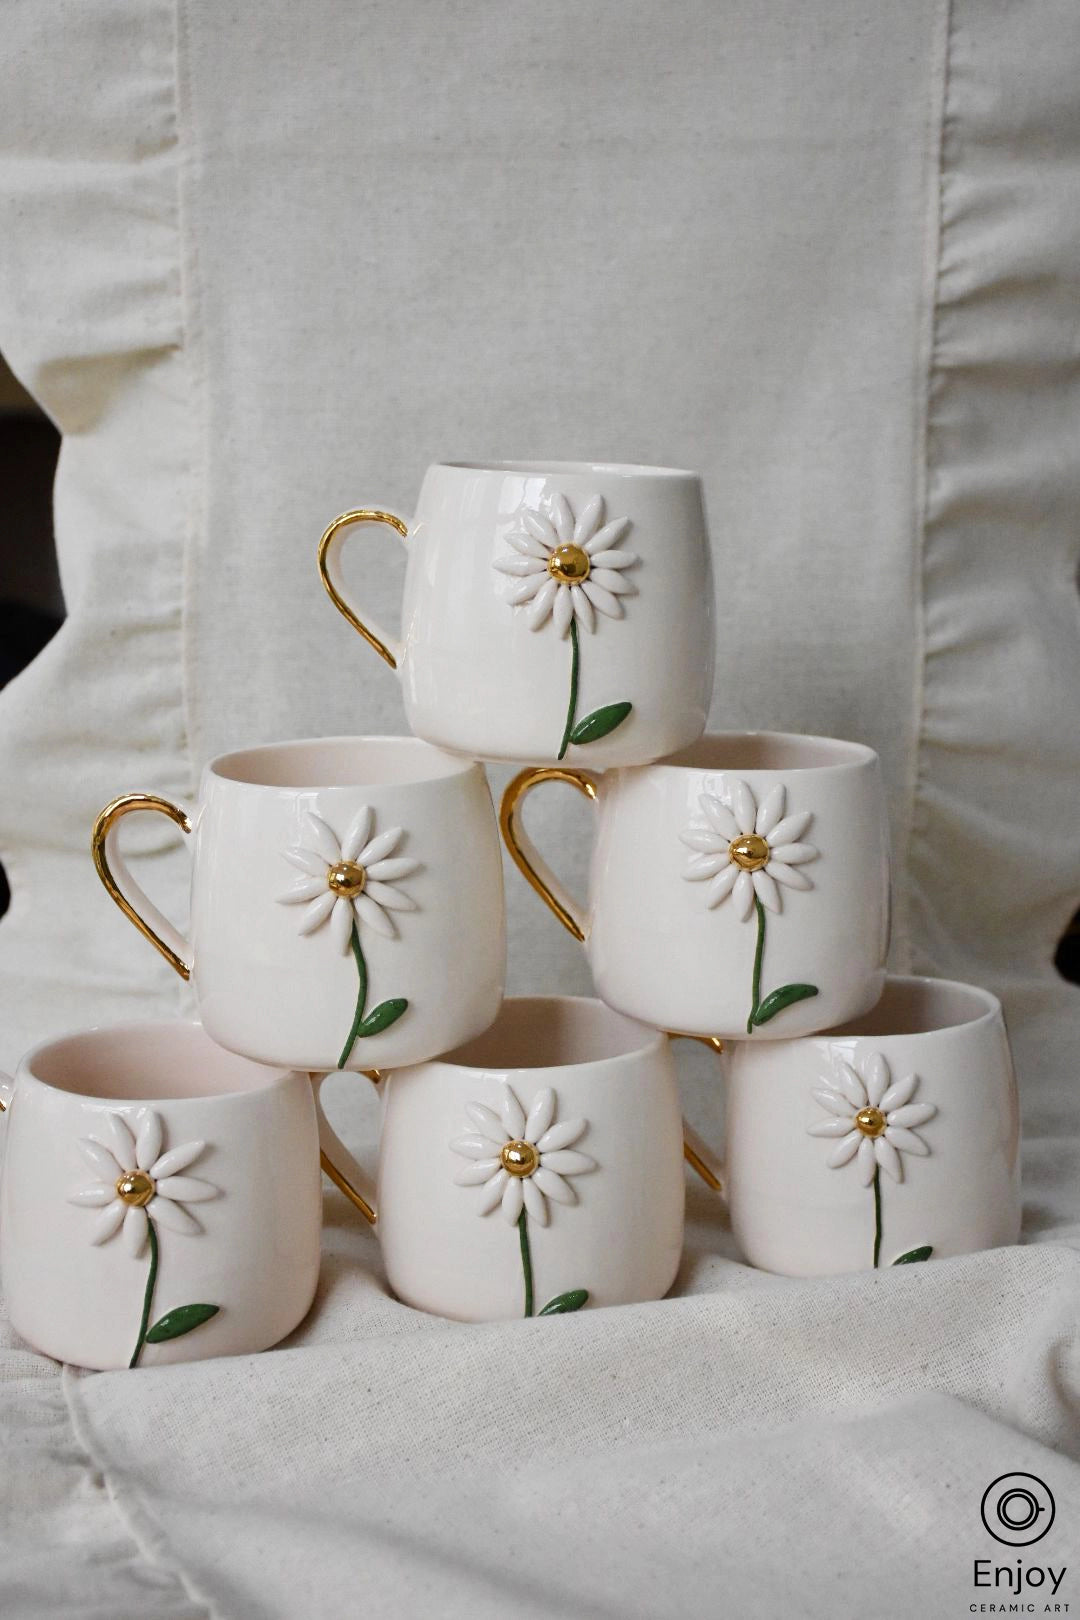 A pyramid of elegant white mugs with relief daisy designs and golden handles, artistically arranged against a linen backdrop.